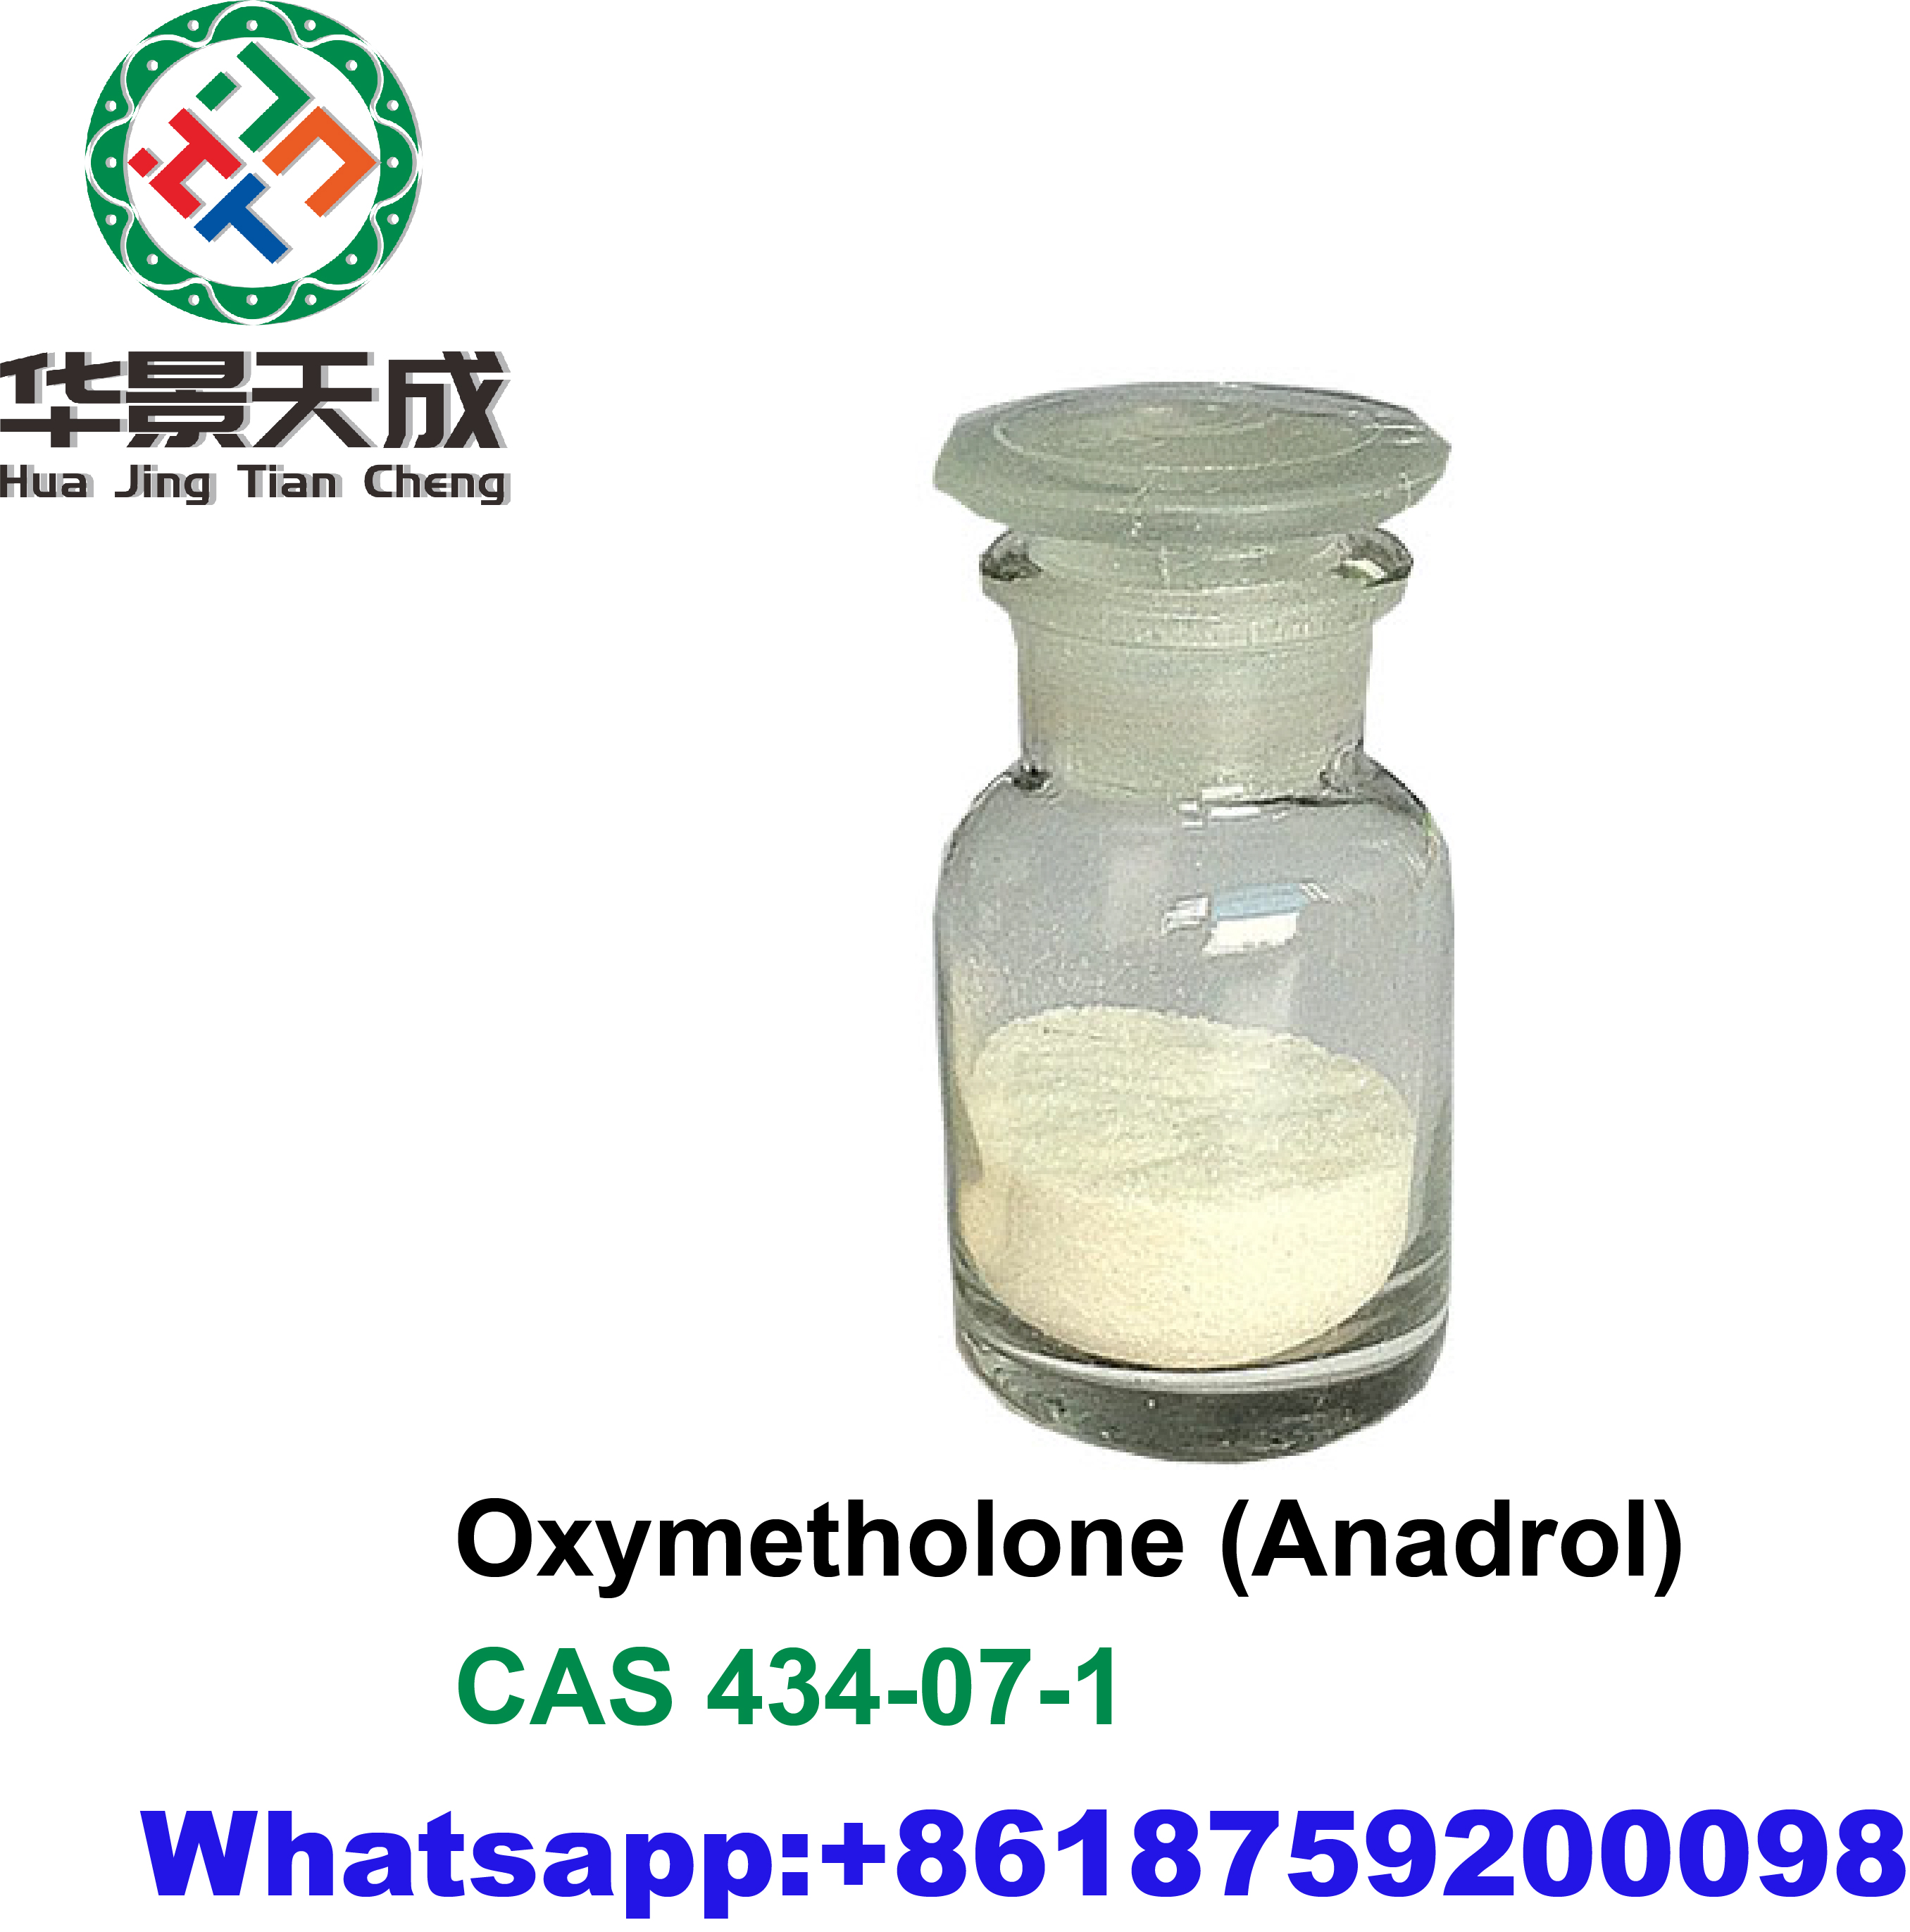 Oxymetholone Powder Steroid For Cutting Cycle Anadrol Muscle Building Steroids CAS 434-07-1 Featured Image